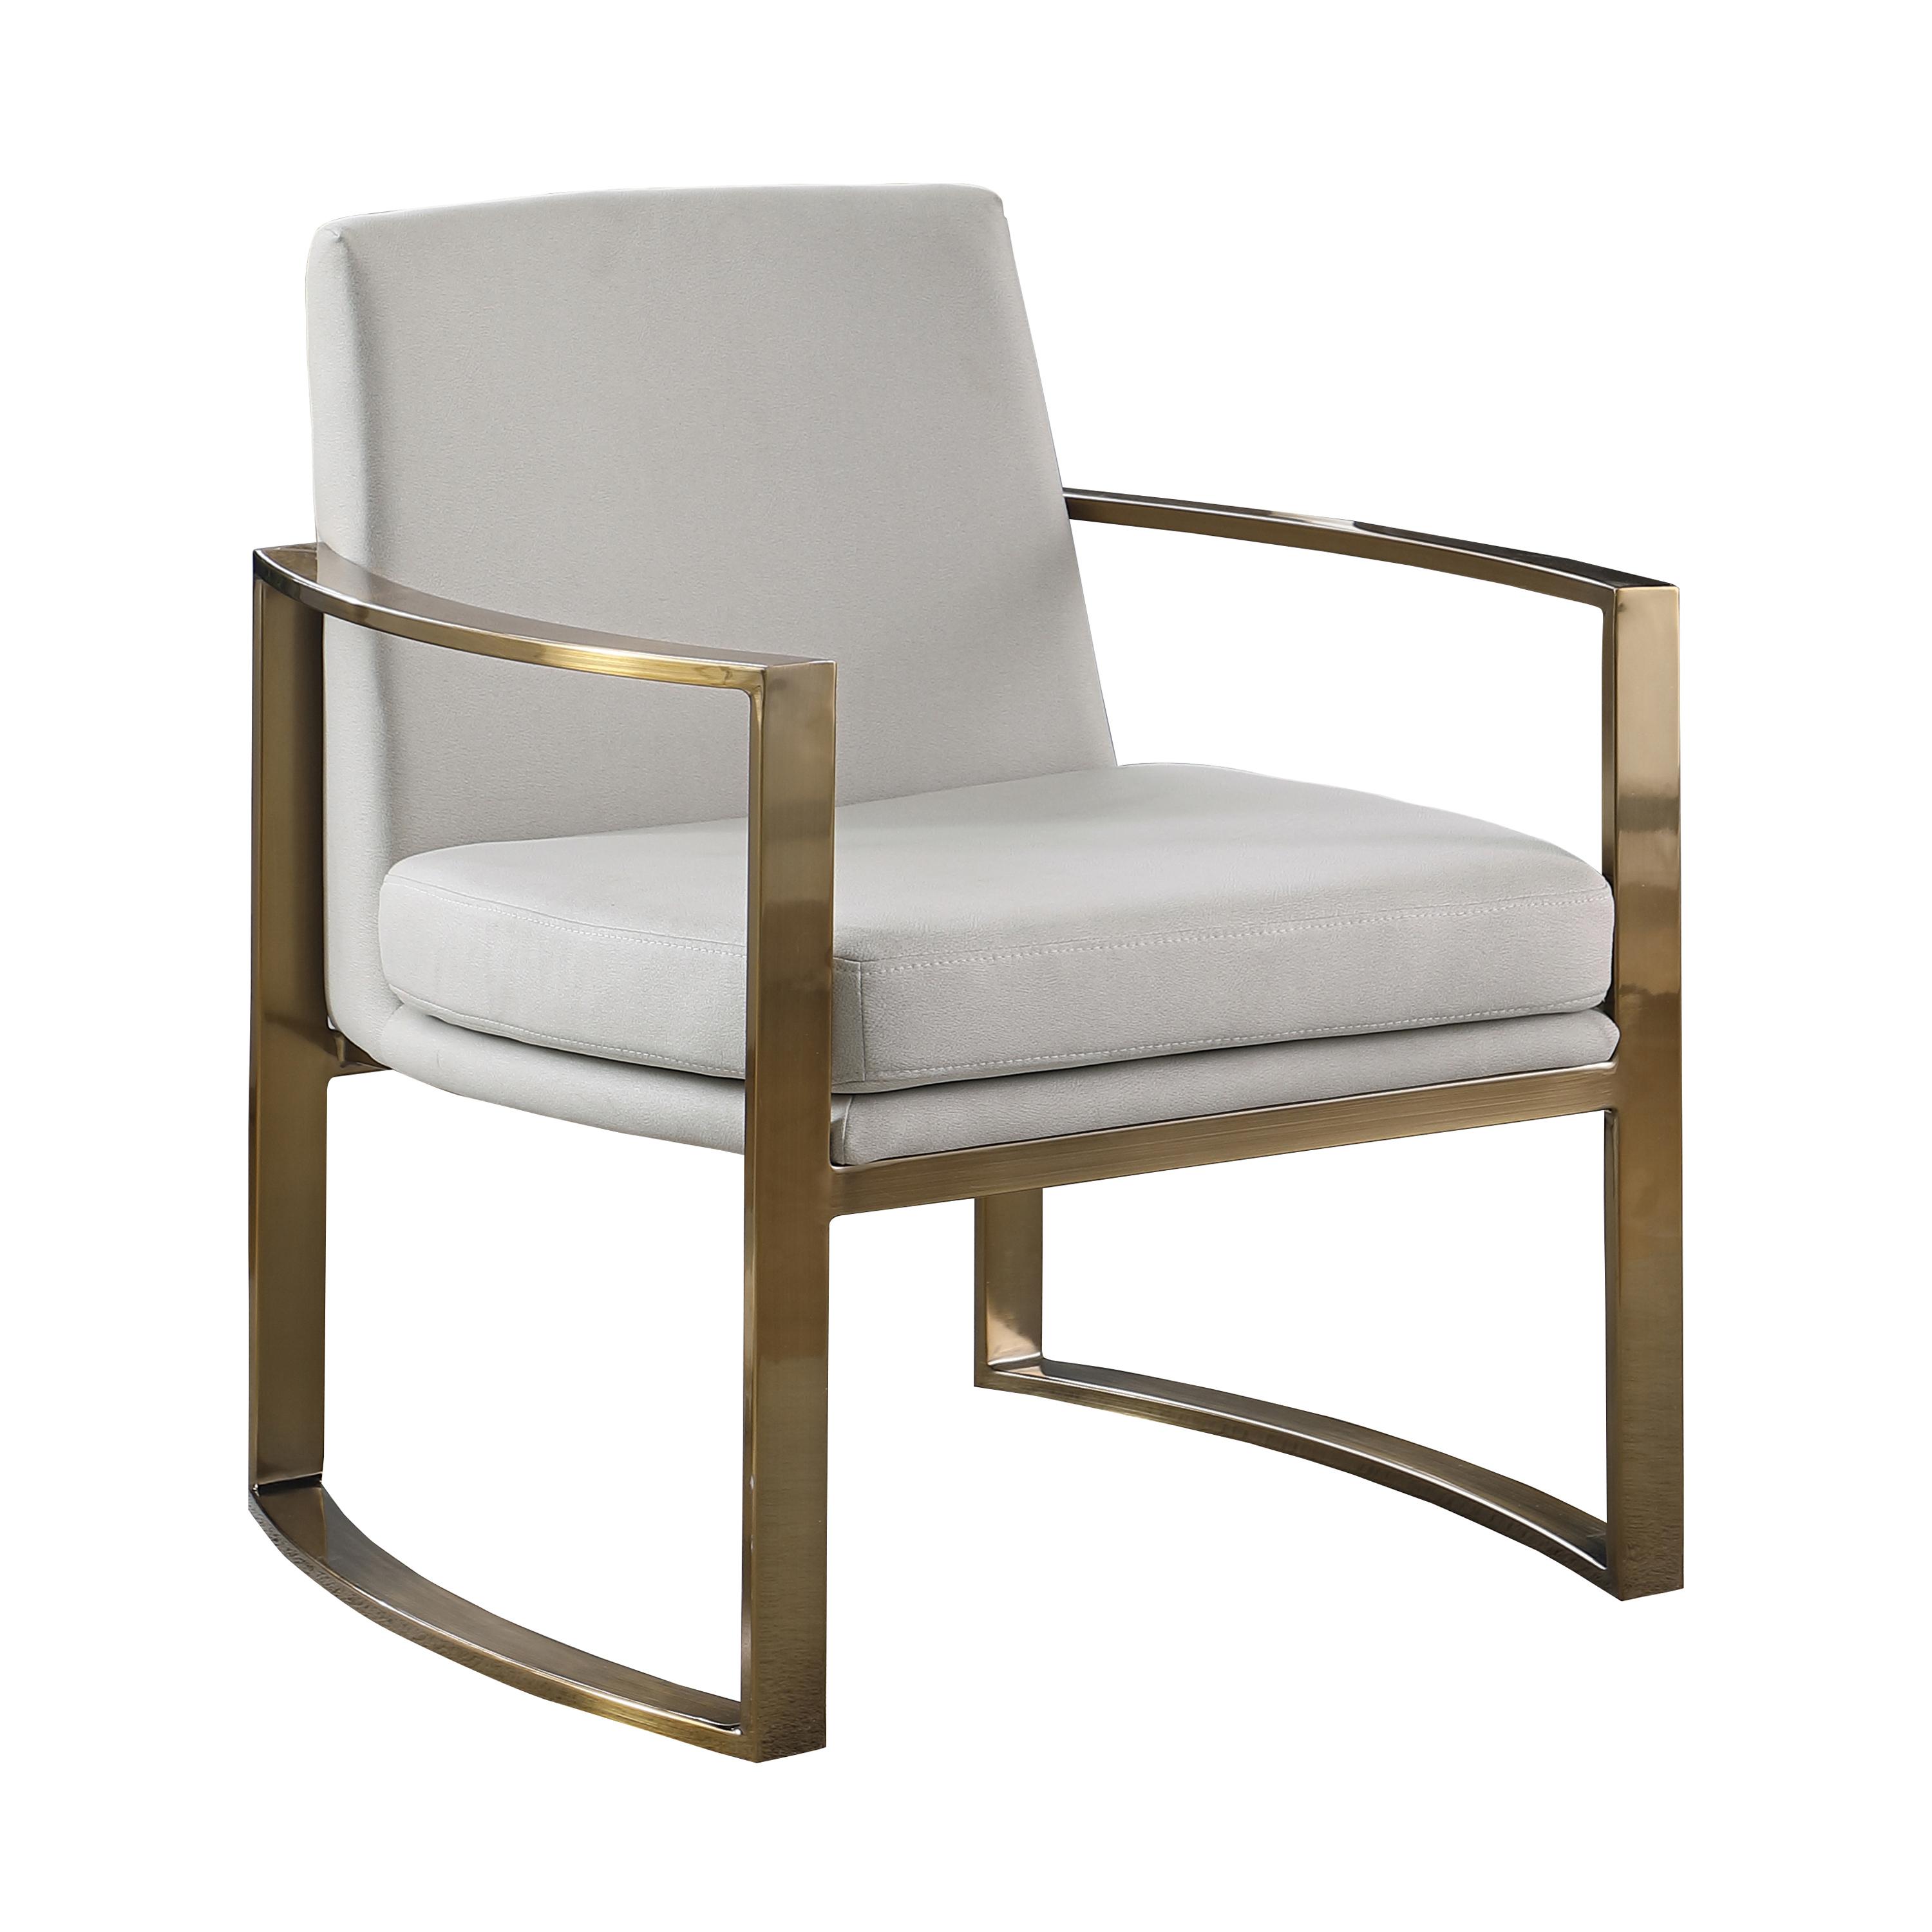 Modern Accent Chair 903048 903048 in Cream Leatherette